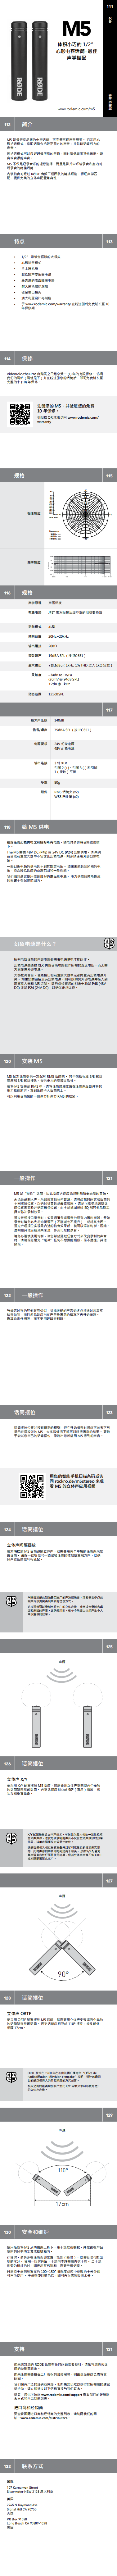 M5 MP_manual_Chinese_0.png